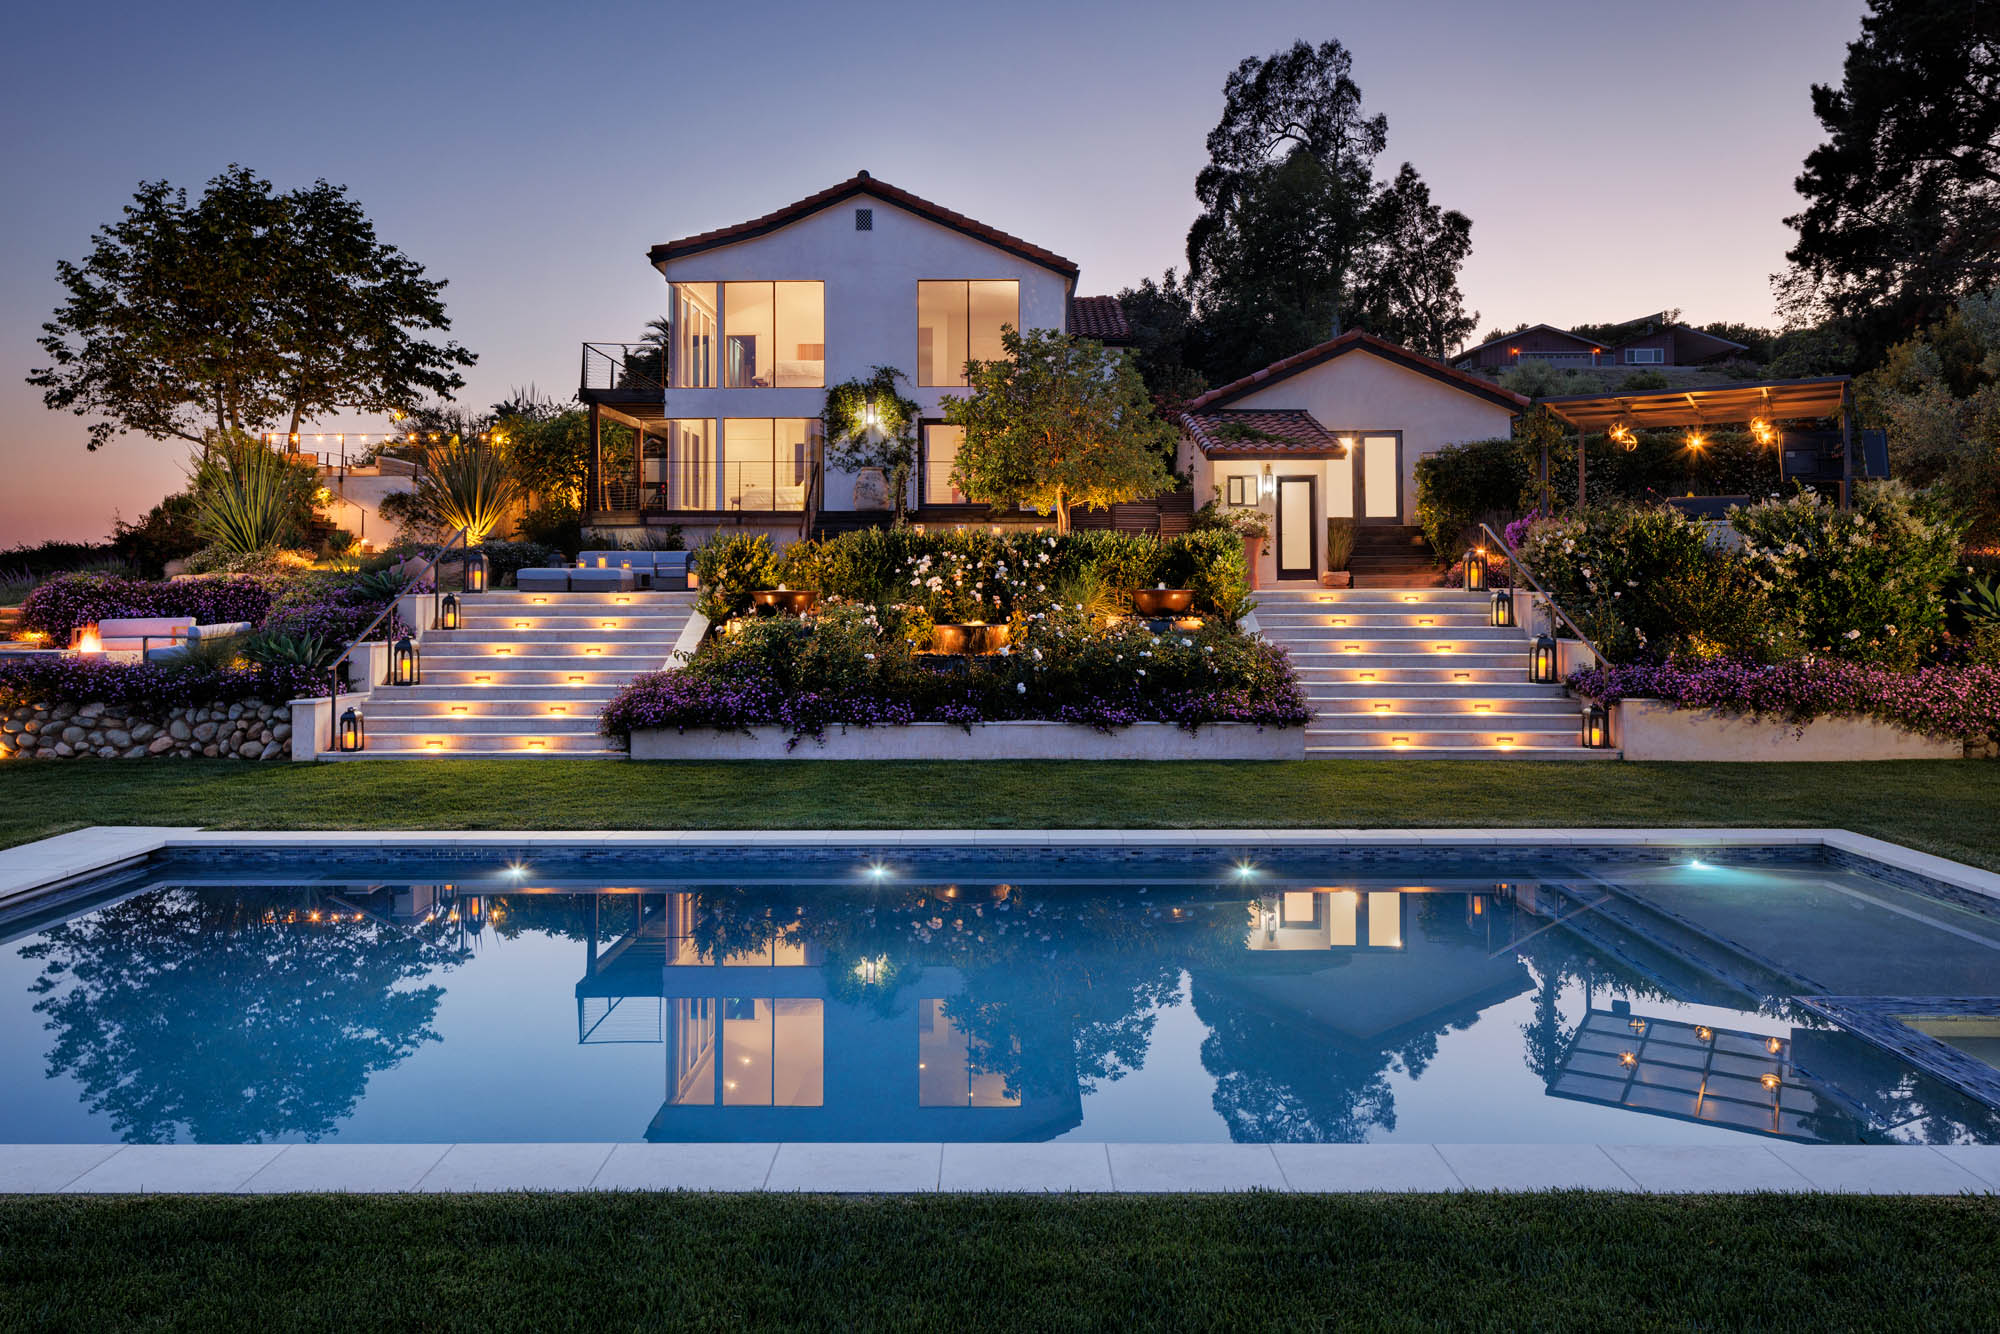 Luxury Malibu mansion with pool and terraced landscape architecture at dusk